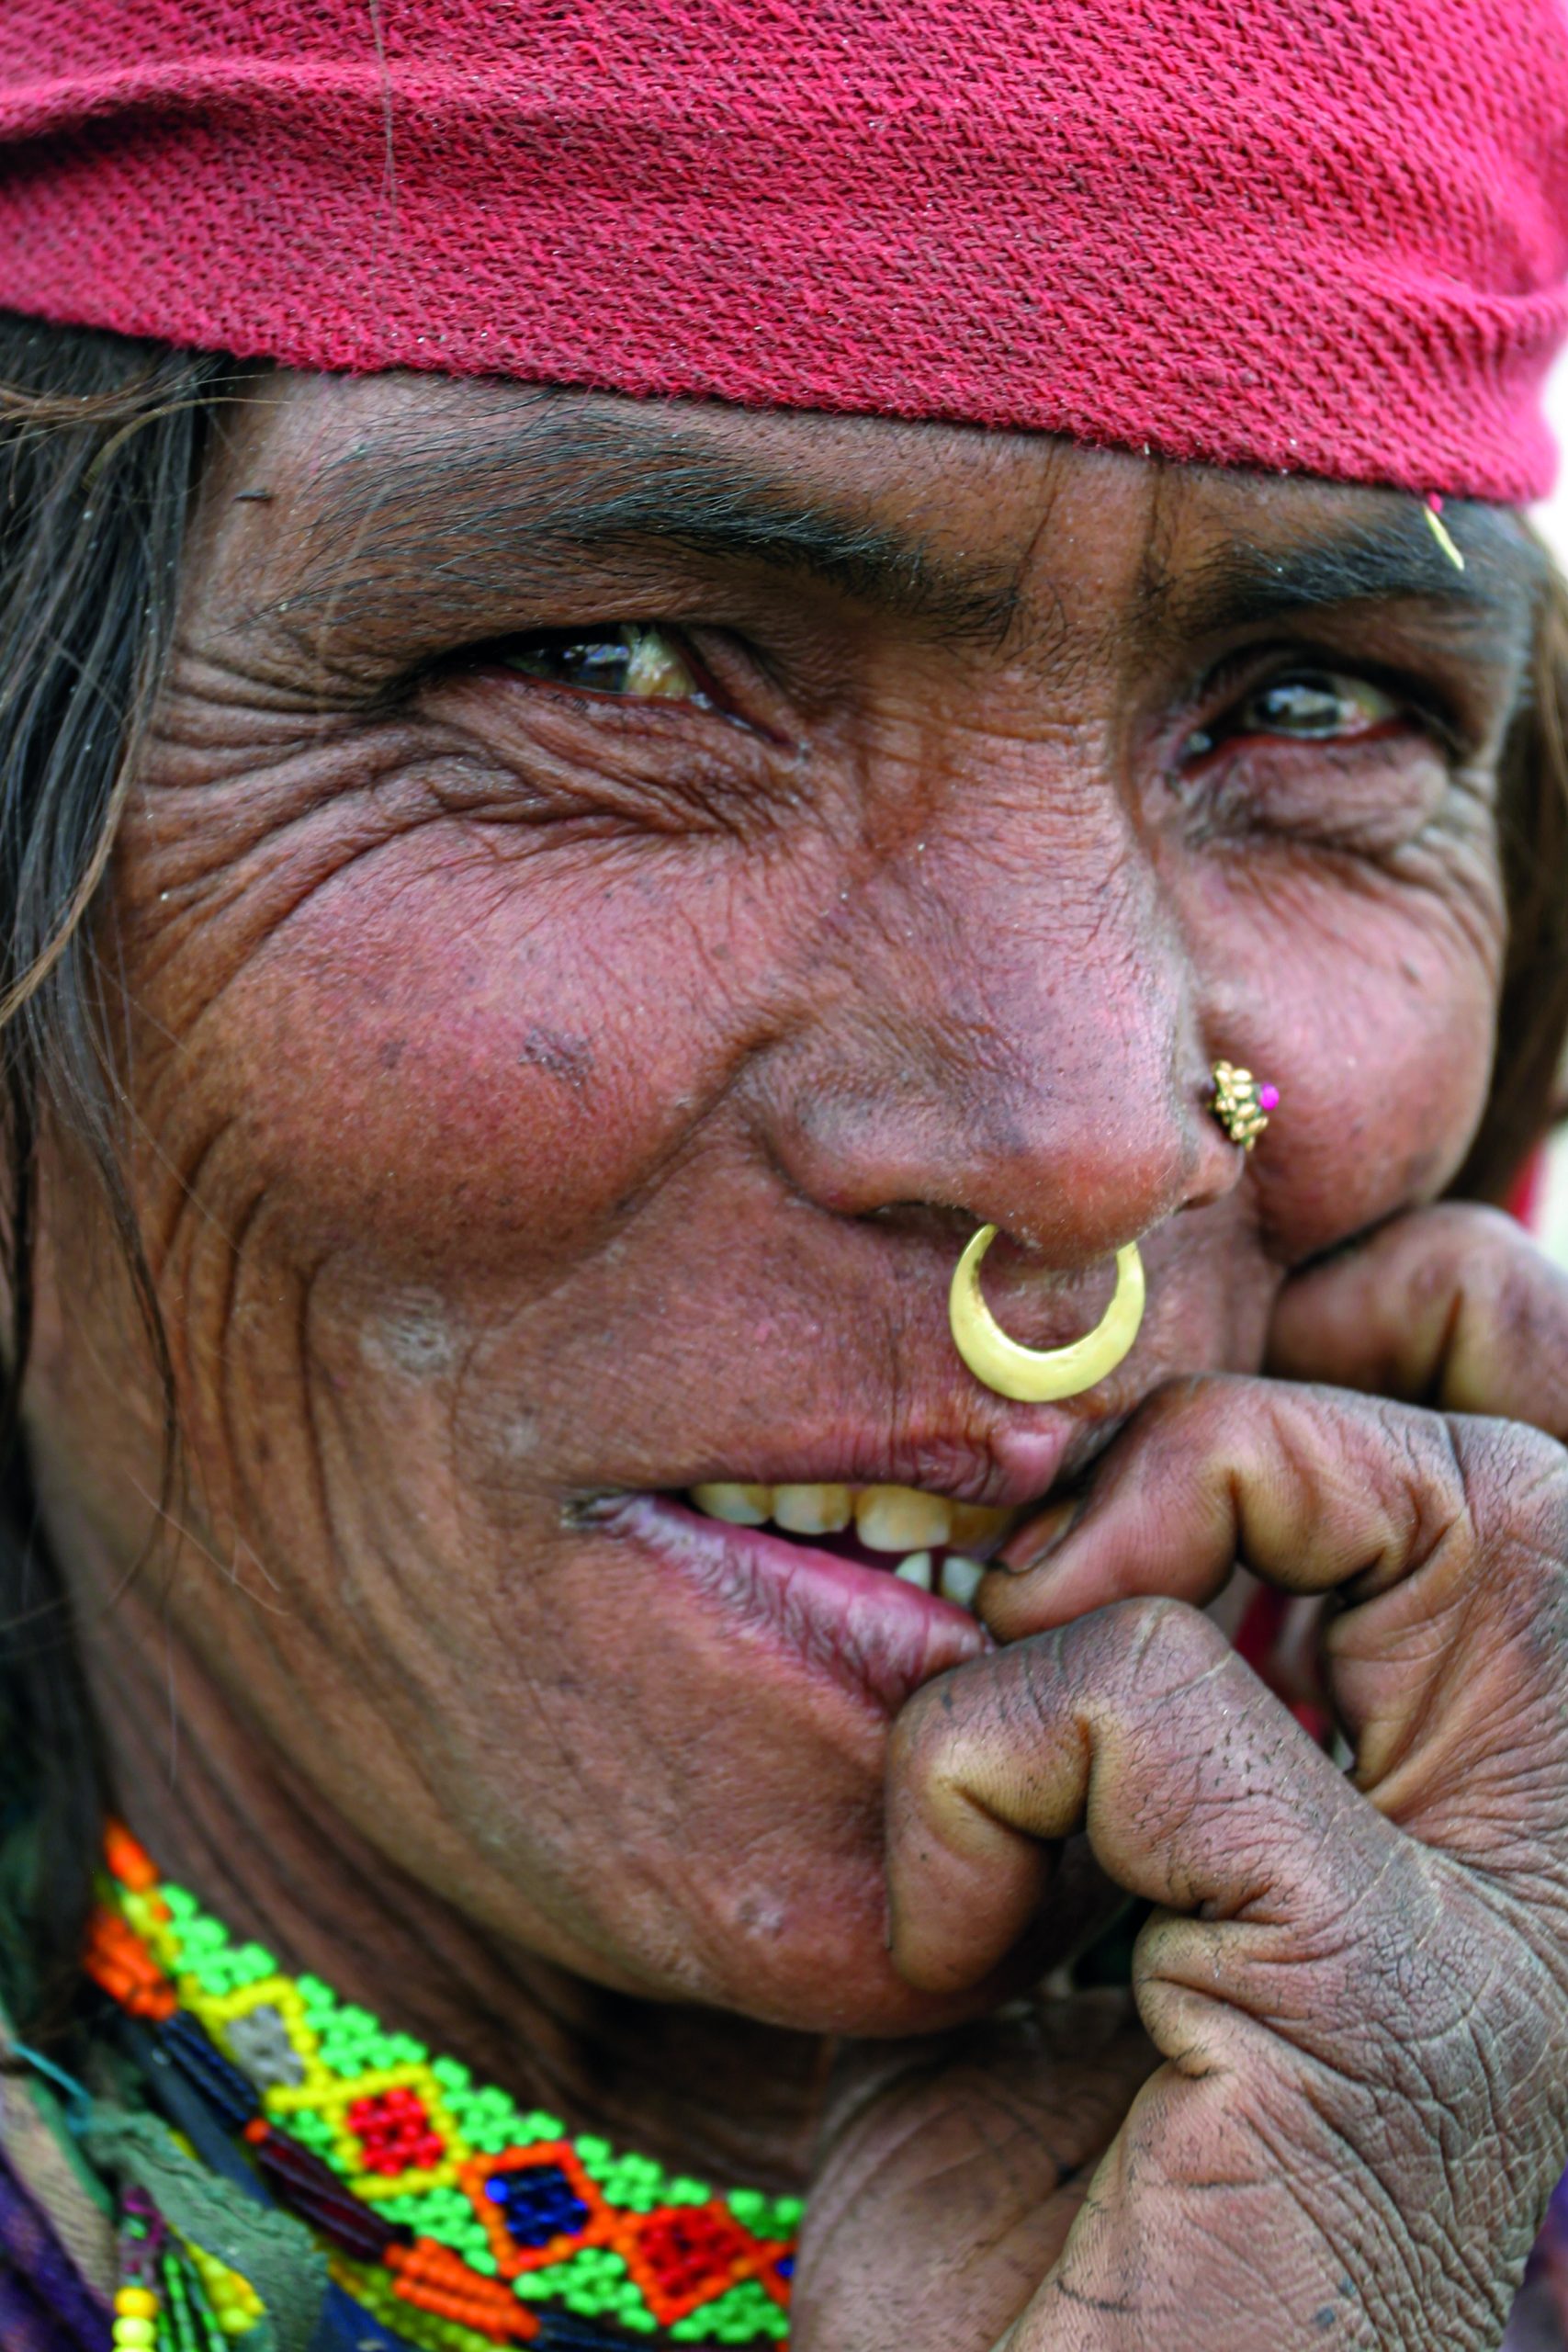 A friendly and curious woman's face, her fingers reaching for her mouth. The woman has a nose ring and age-related wrinkles around the eyes.